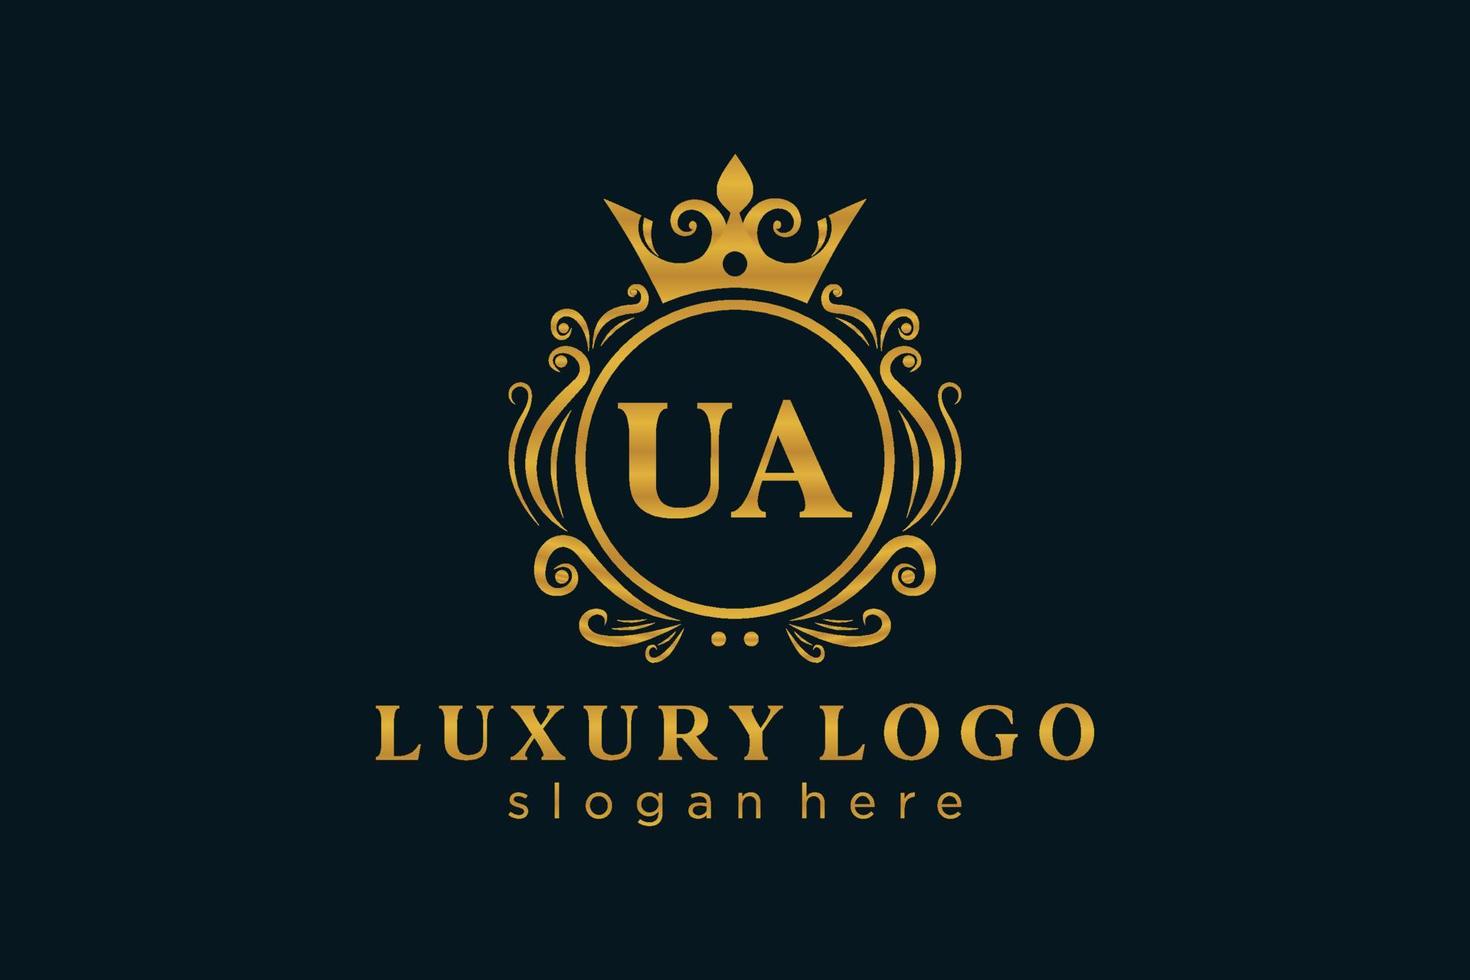 Initial UA Letter Royal Luxury Logo template in vector art for Restaurant, Royalty, Boutique, Cafe, Hotel, Heraldic, Jewelry, Fashion and other vector illustration.